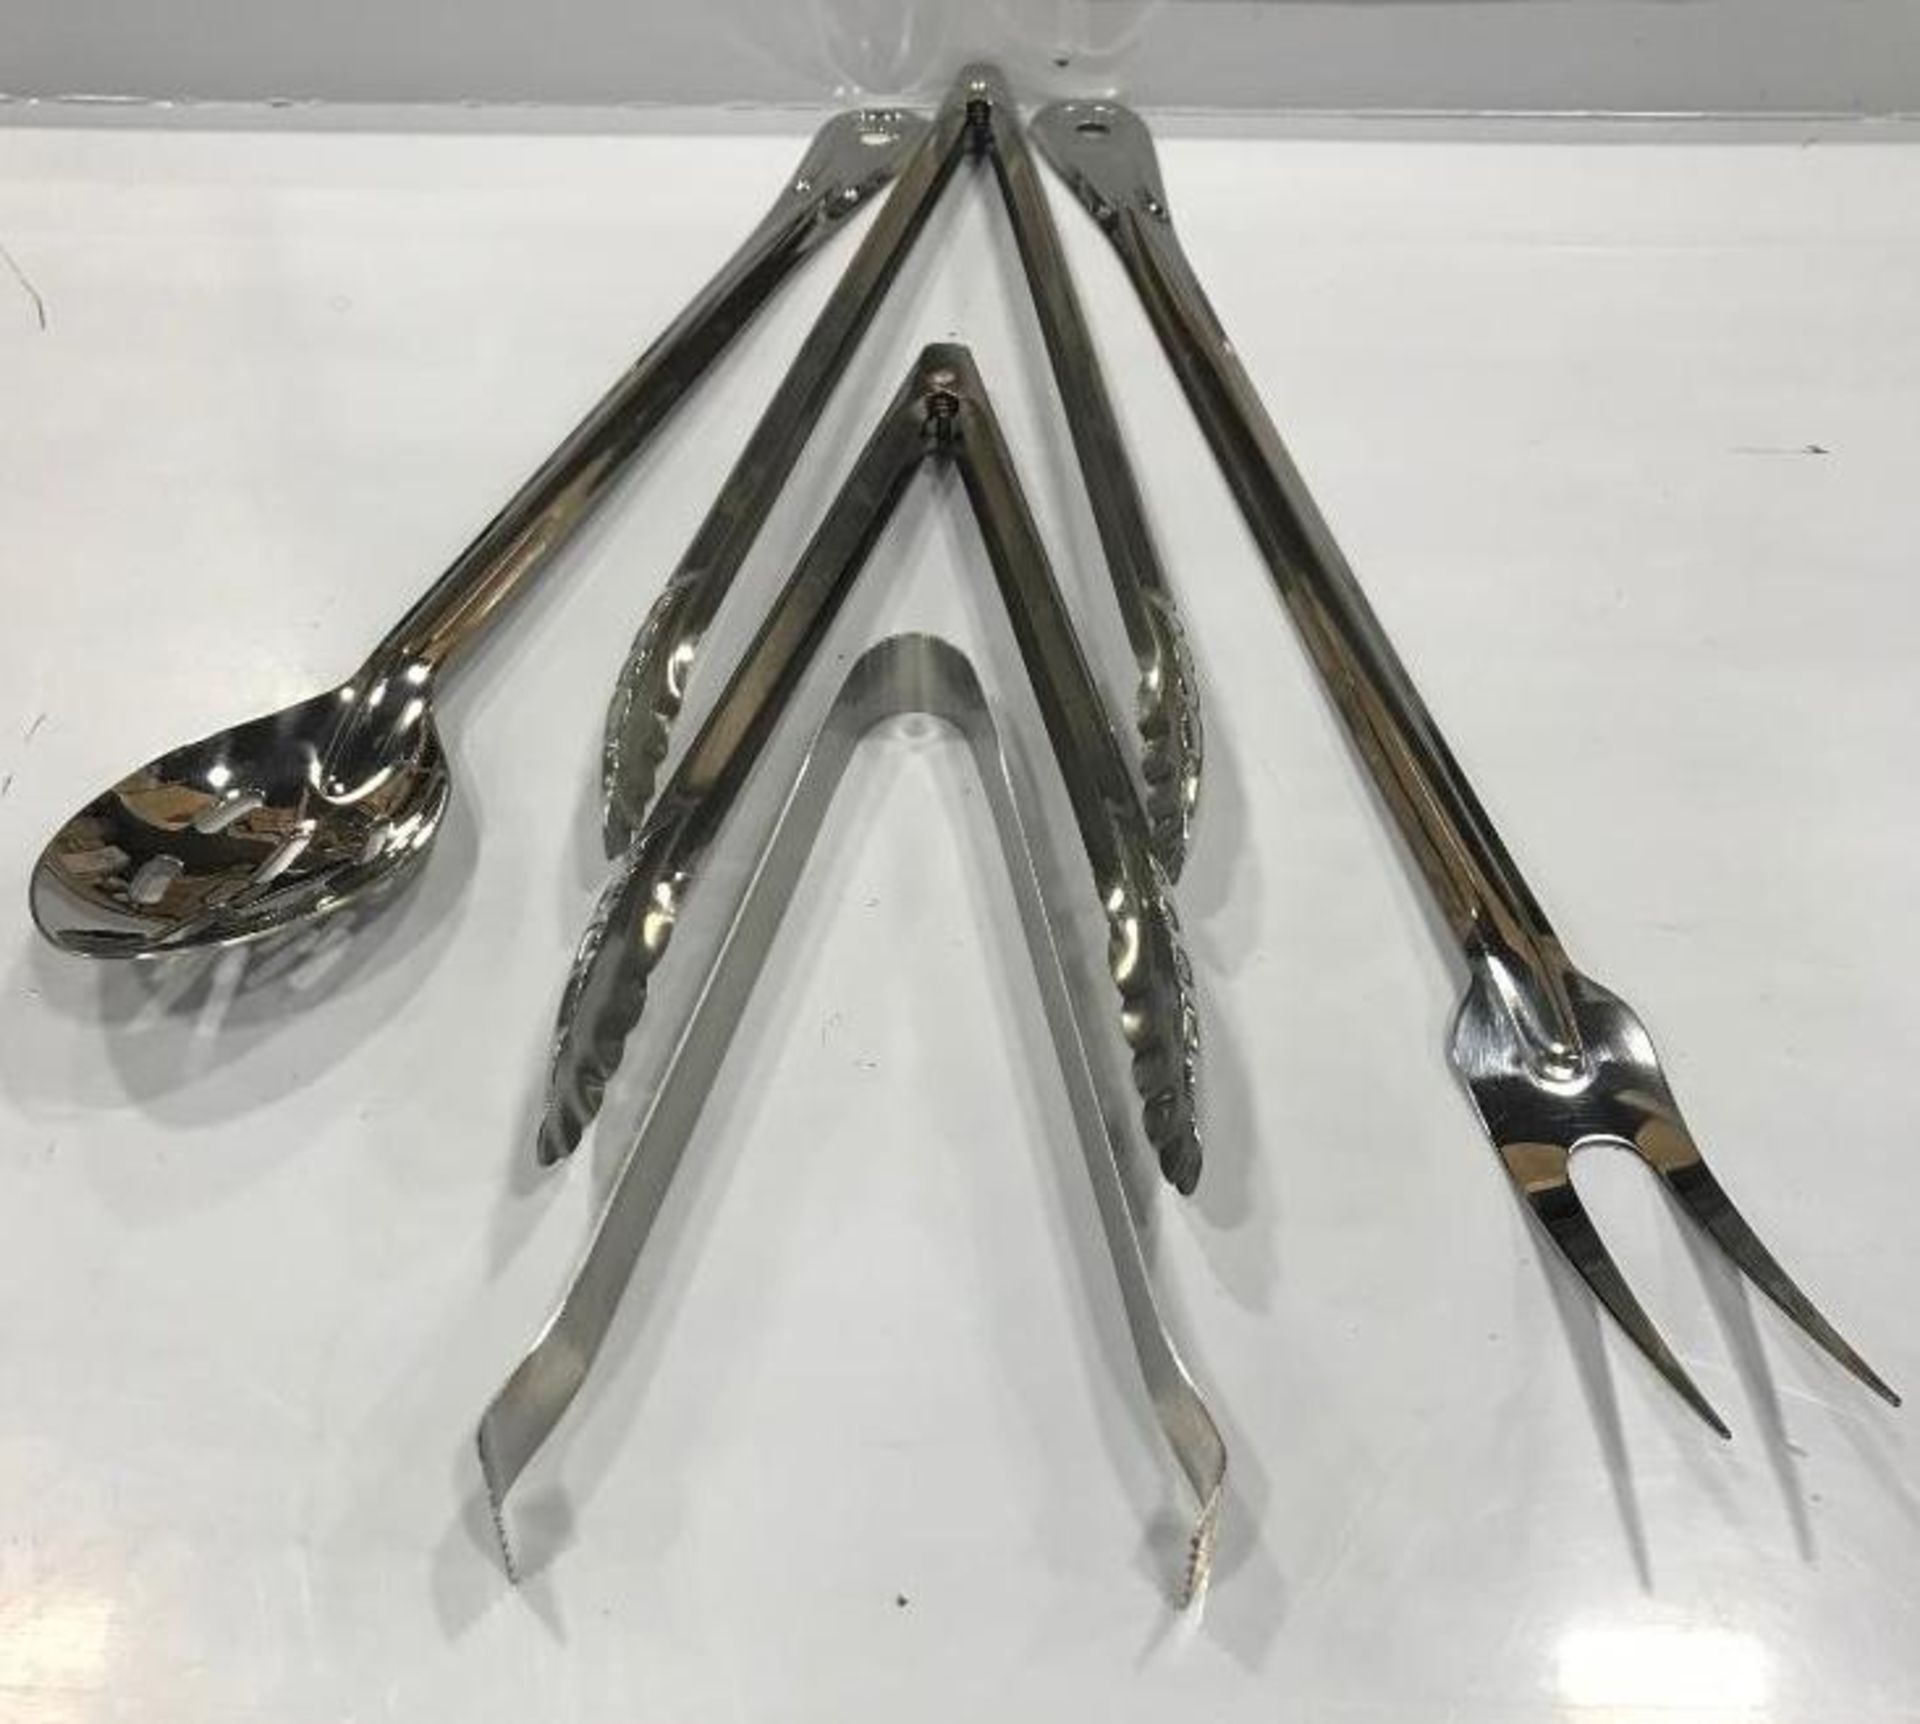 NEW BBQ UTENSILS SET INCLUDING: 16" & 11" STAINLESS STEEL TONGS, 21" COOK'S FORK & 18" SLOTTED - Image 3 of 3